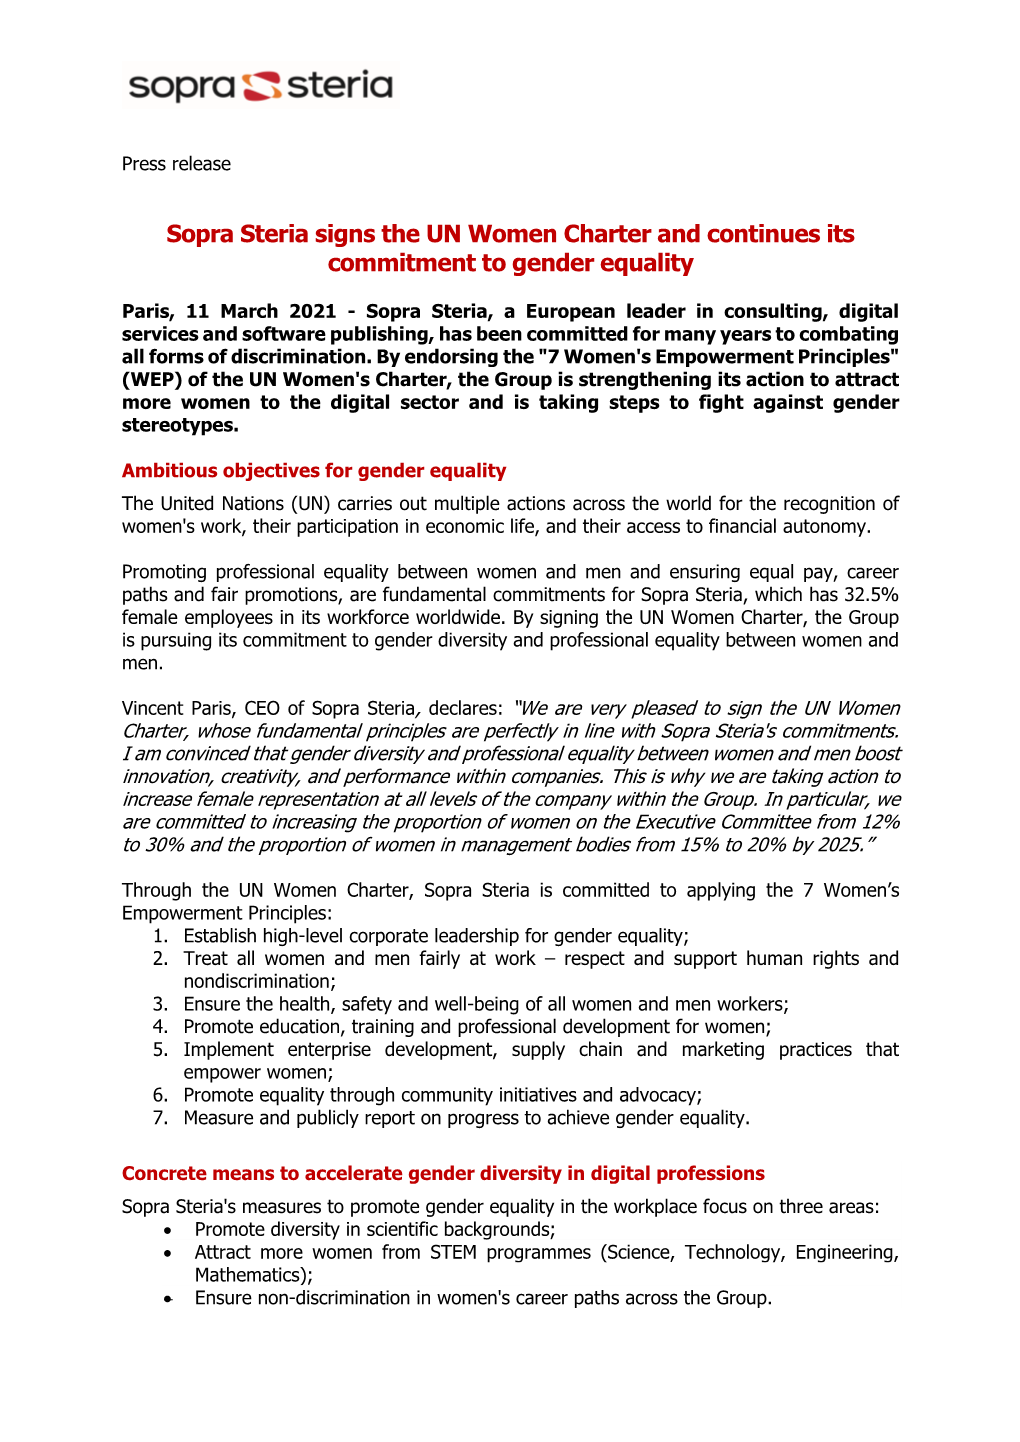 Sopra Steria Signs the UN Women Charter and Continues Its Commitment to Gender Equality